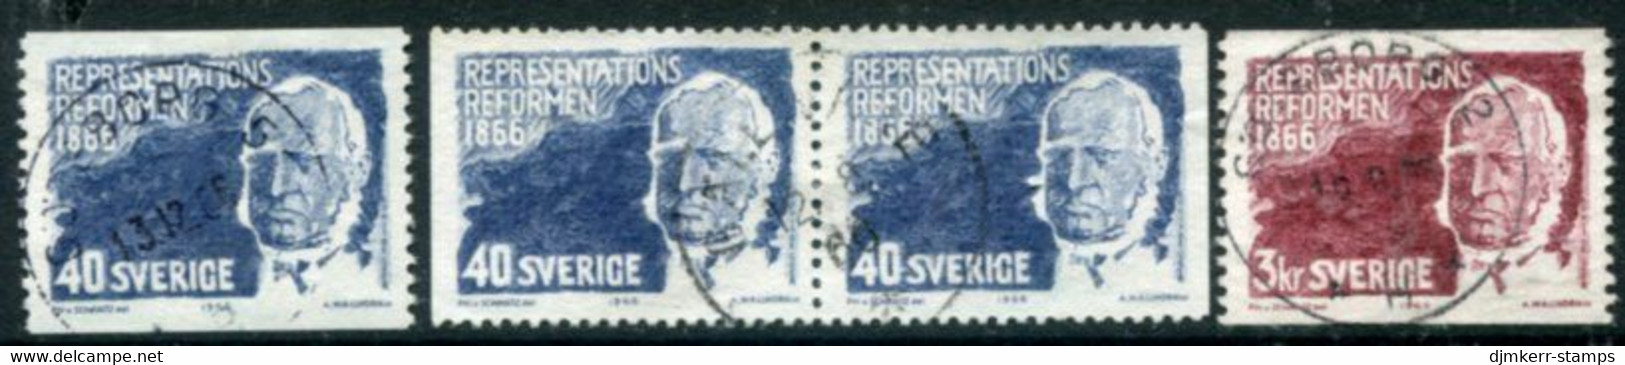 SWEDEN 1966 Centenary Of Constitutional Reform Used.  Michel 553-54 - Usados